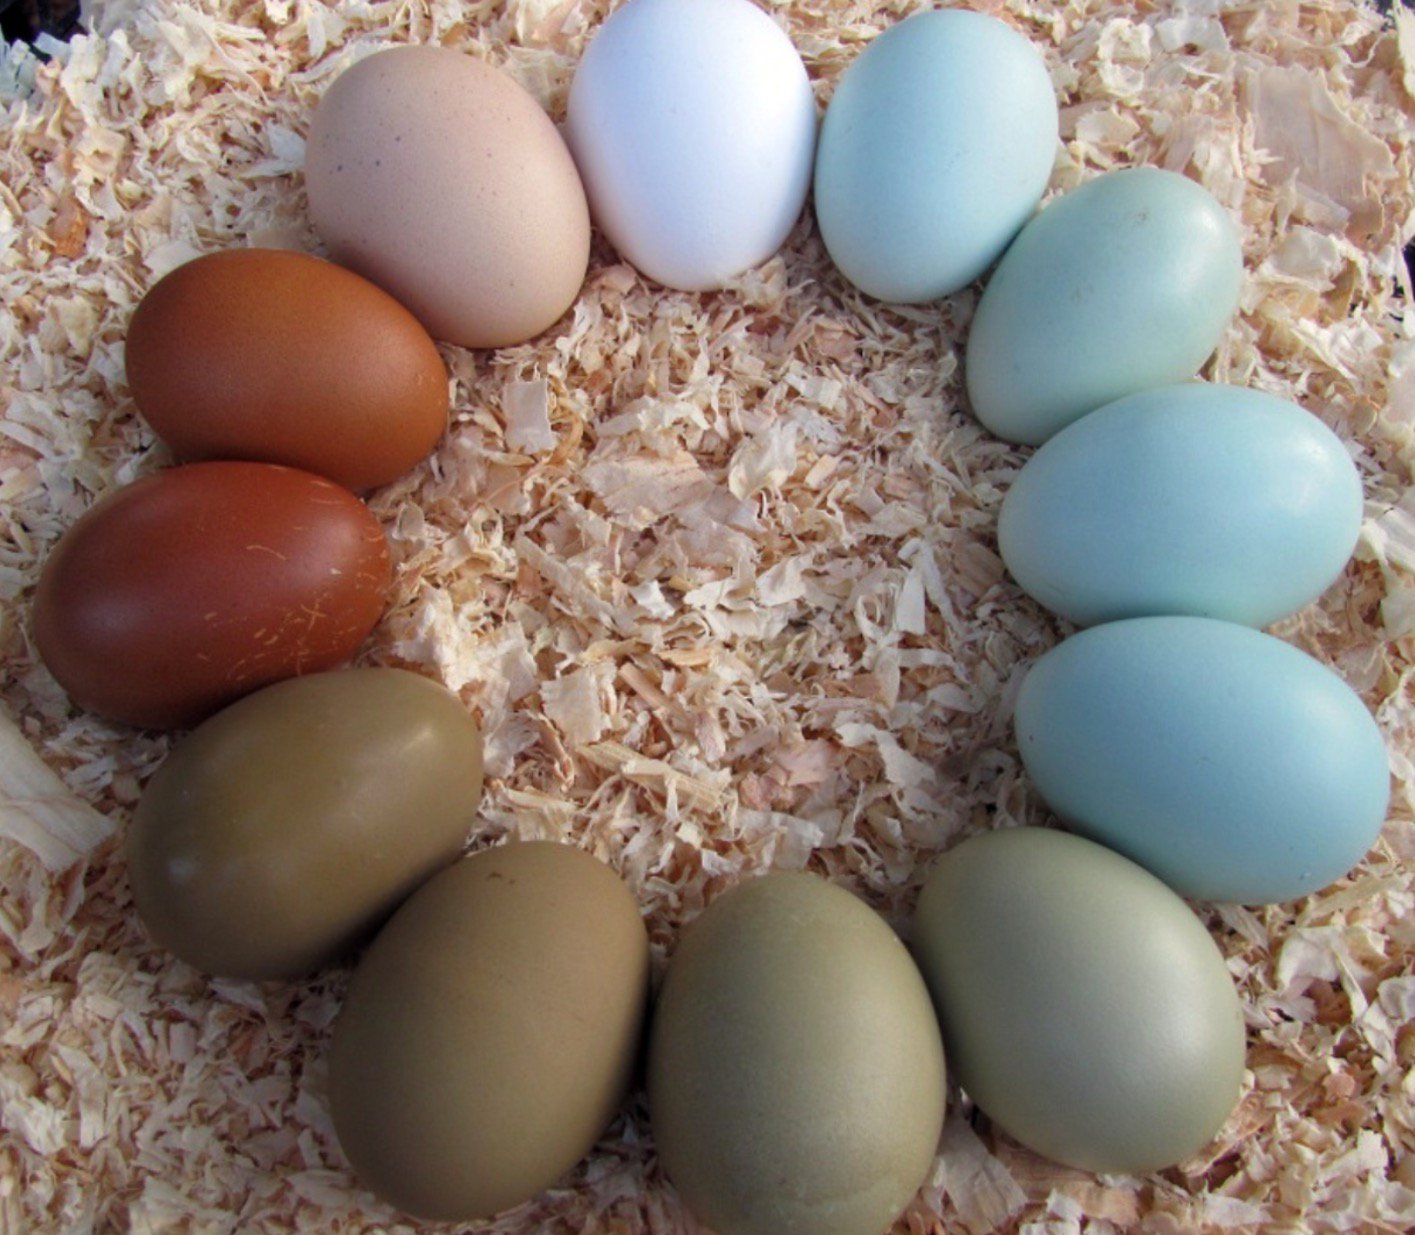 Historic Wagner Farm "The Araucana Chicken also called the Easter Egg Chicken because it lays blue, and pink eggs #farmfactsfriday https://t.co/OaZoJuJ2e3" / Twitter